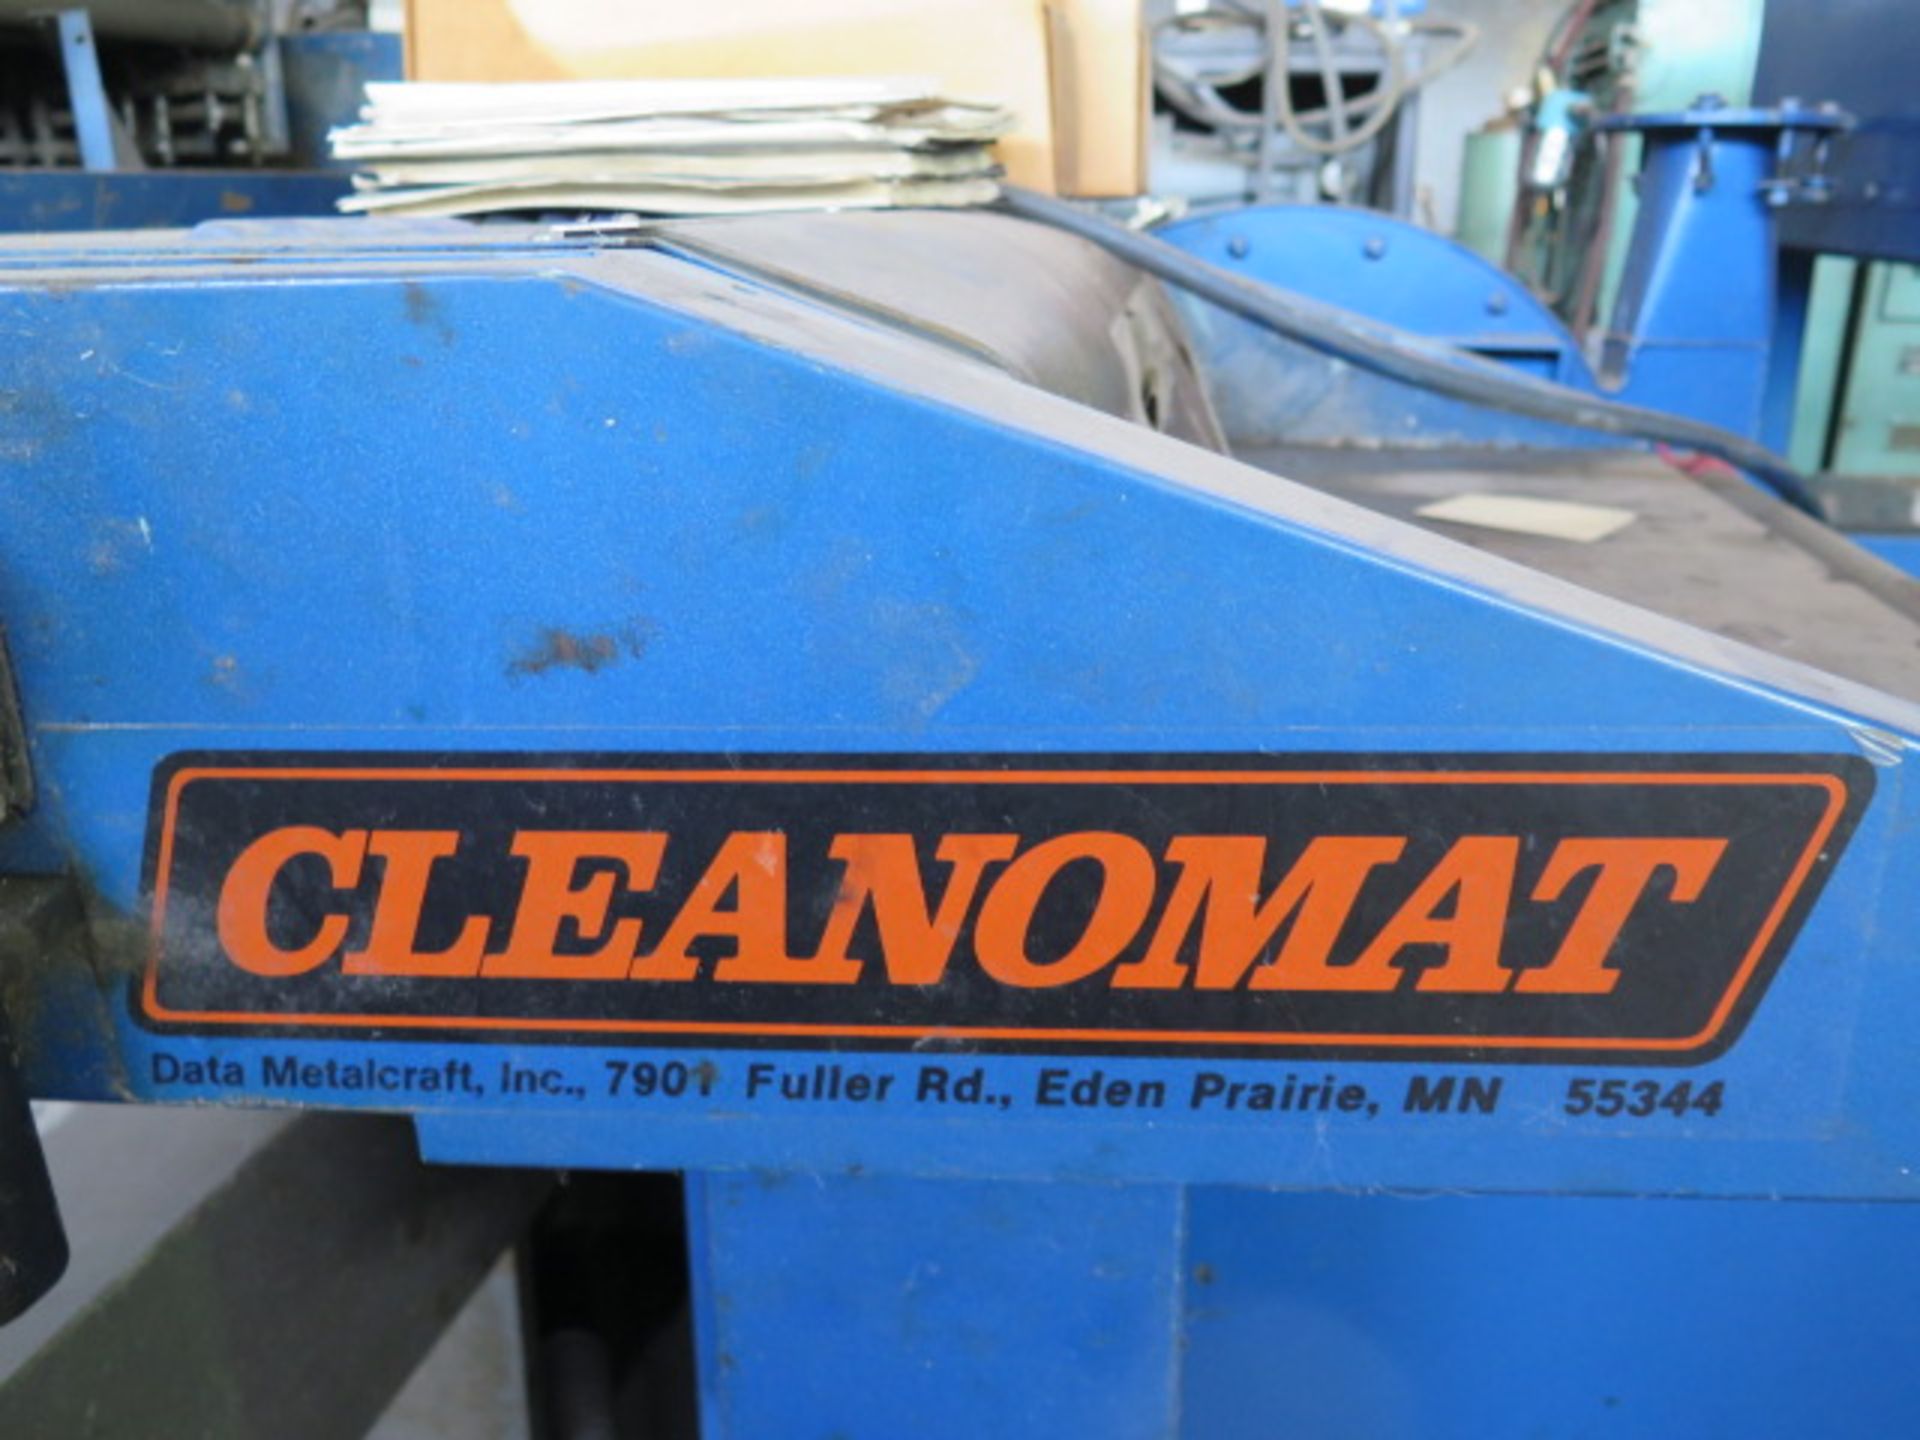 AEM Double Sided 36" Belt Wet Belt Grainer w/ Cleanomat Air Knife (SOLD AS-IS - NO WARRANTY) - Image 15 of 16